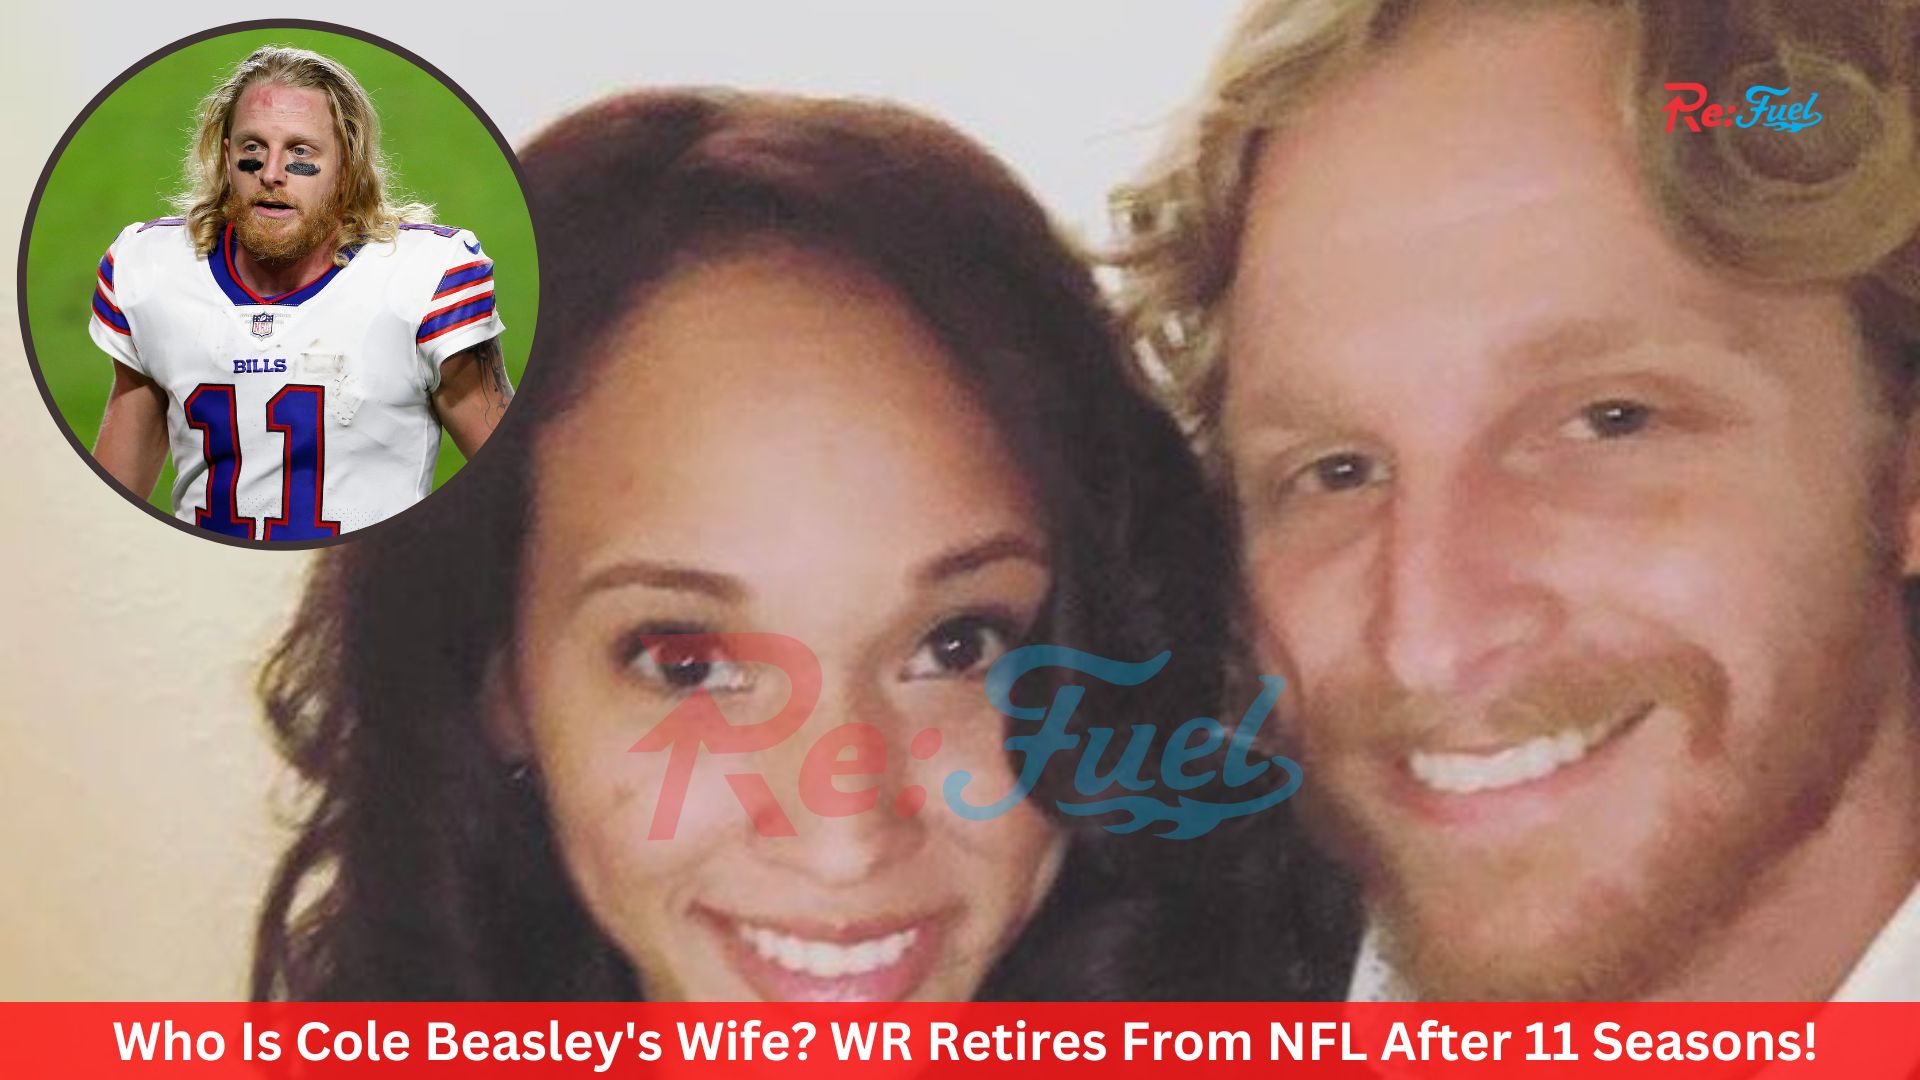 Who Is Cole Beasley's Wife? WR Retires From NFL After 11 Seasons!